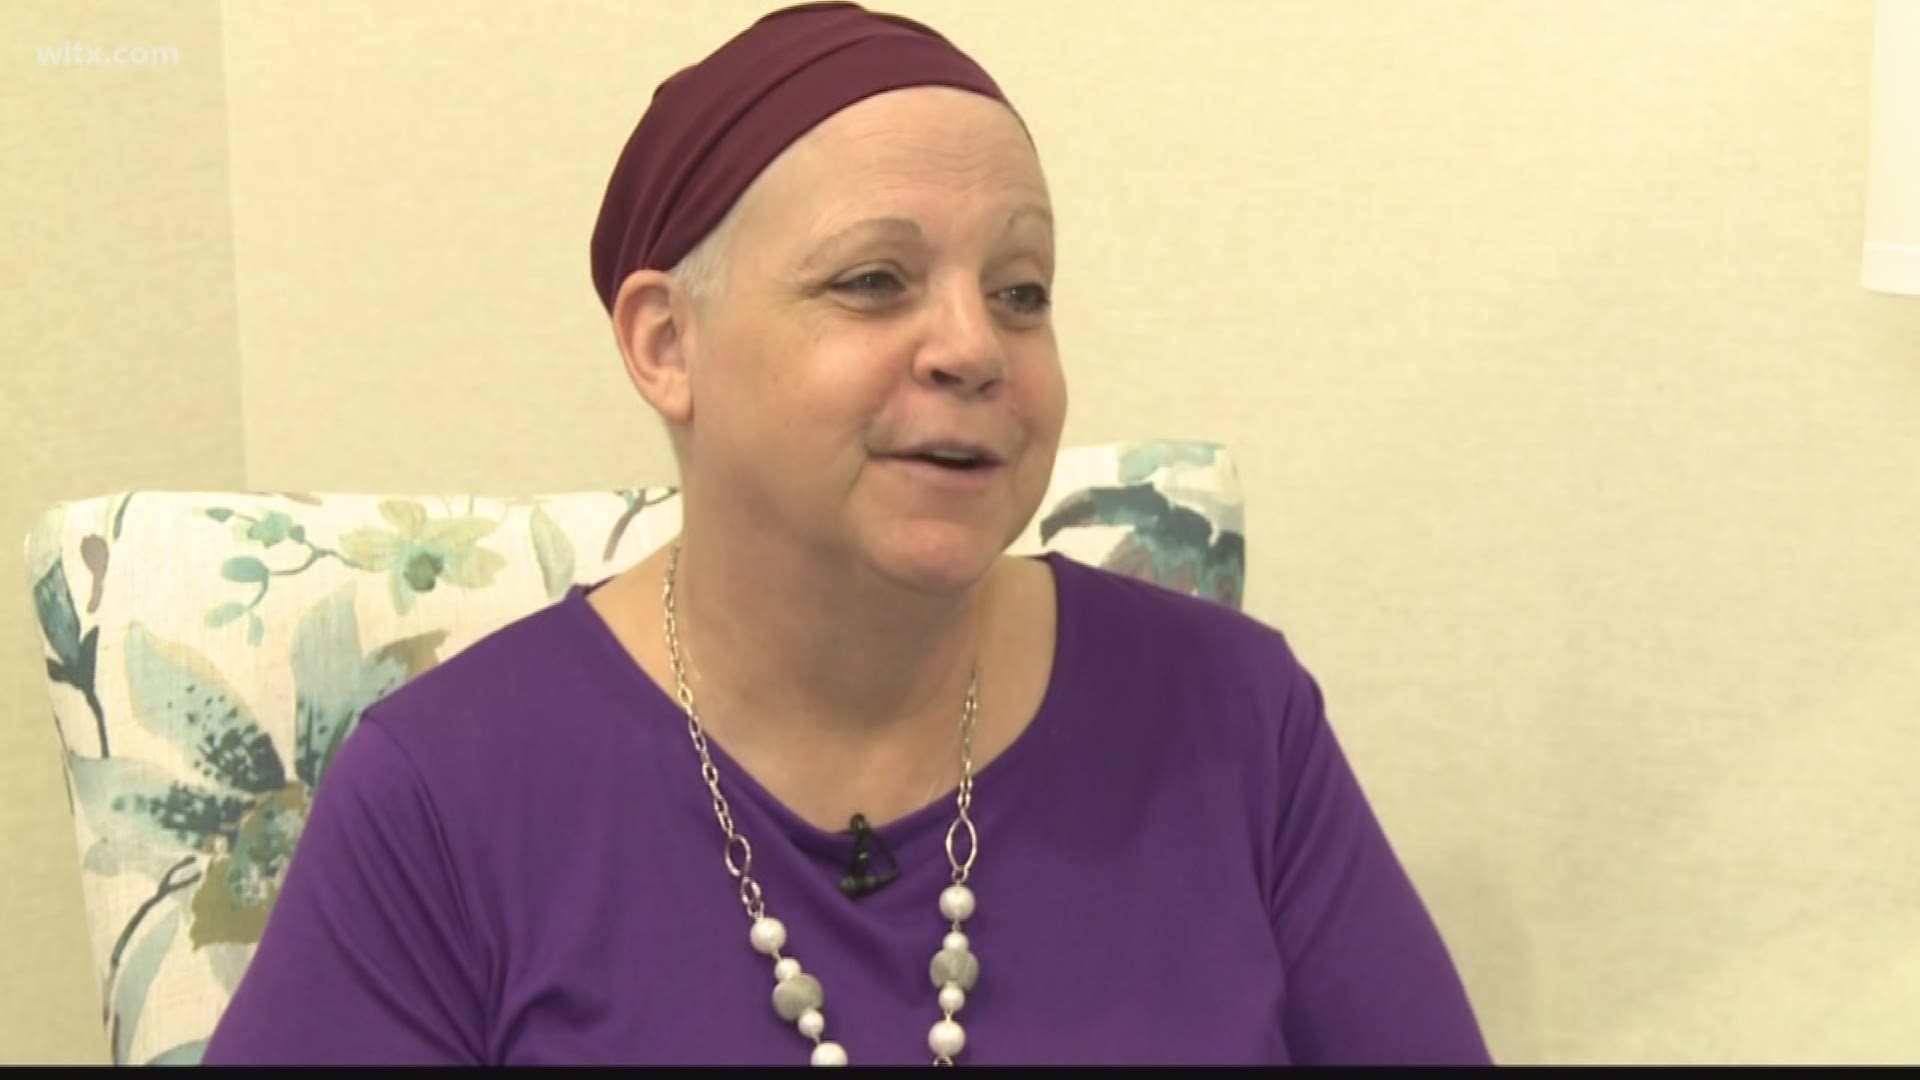 Cancer patients receive free wigs thanks to donations.